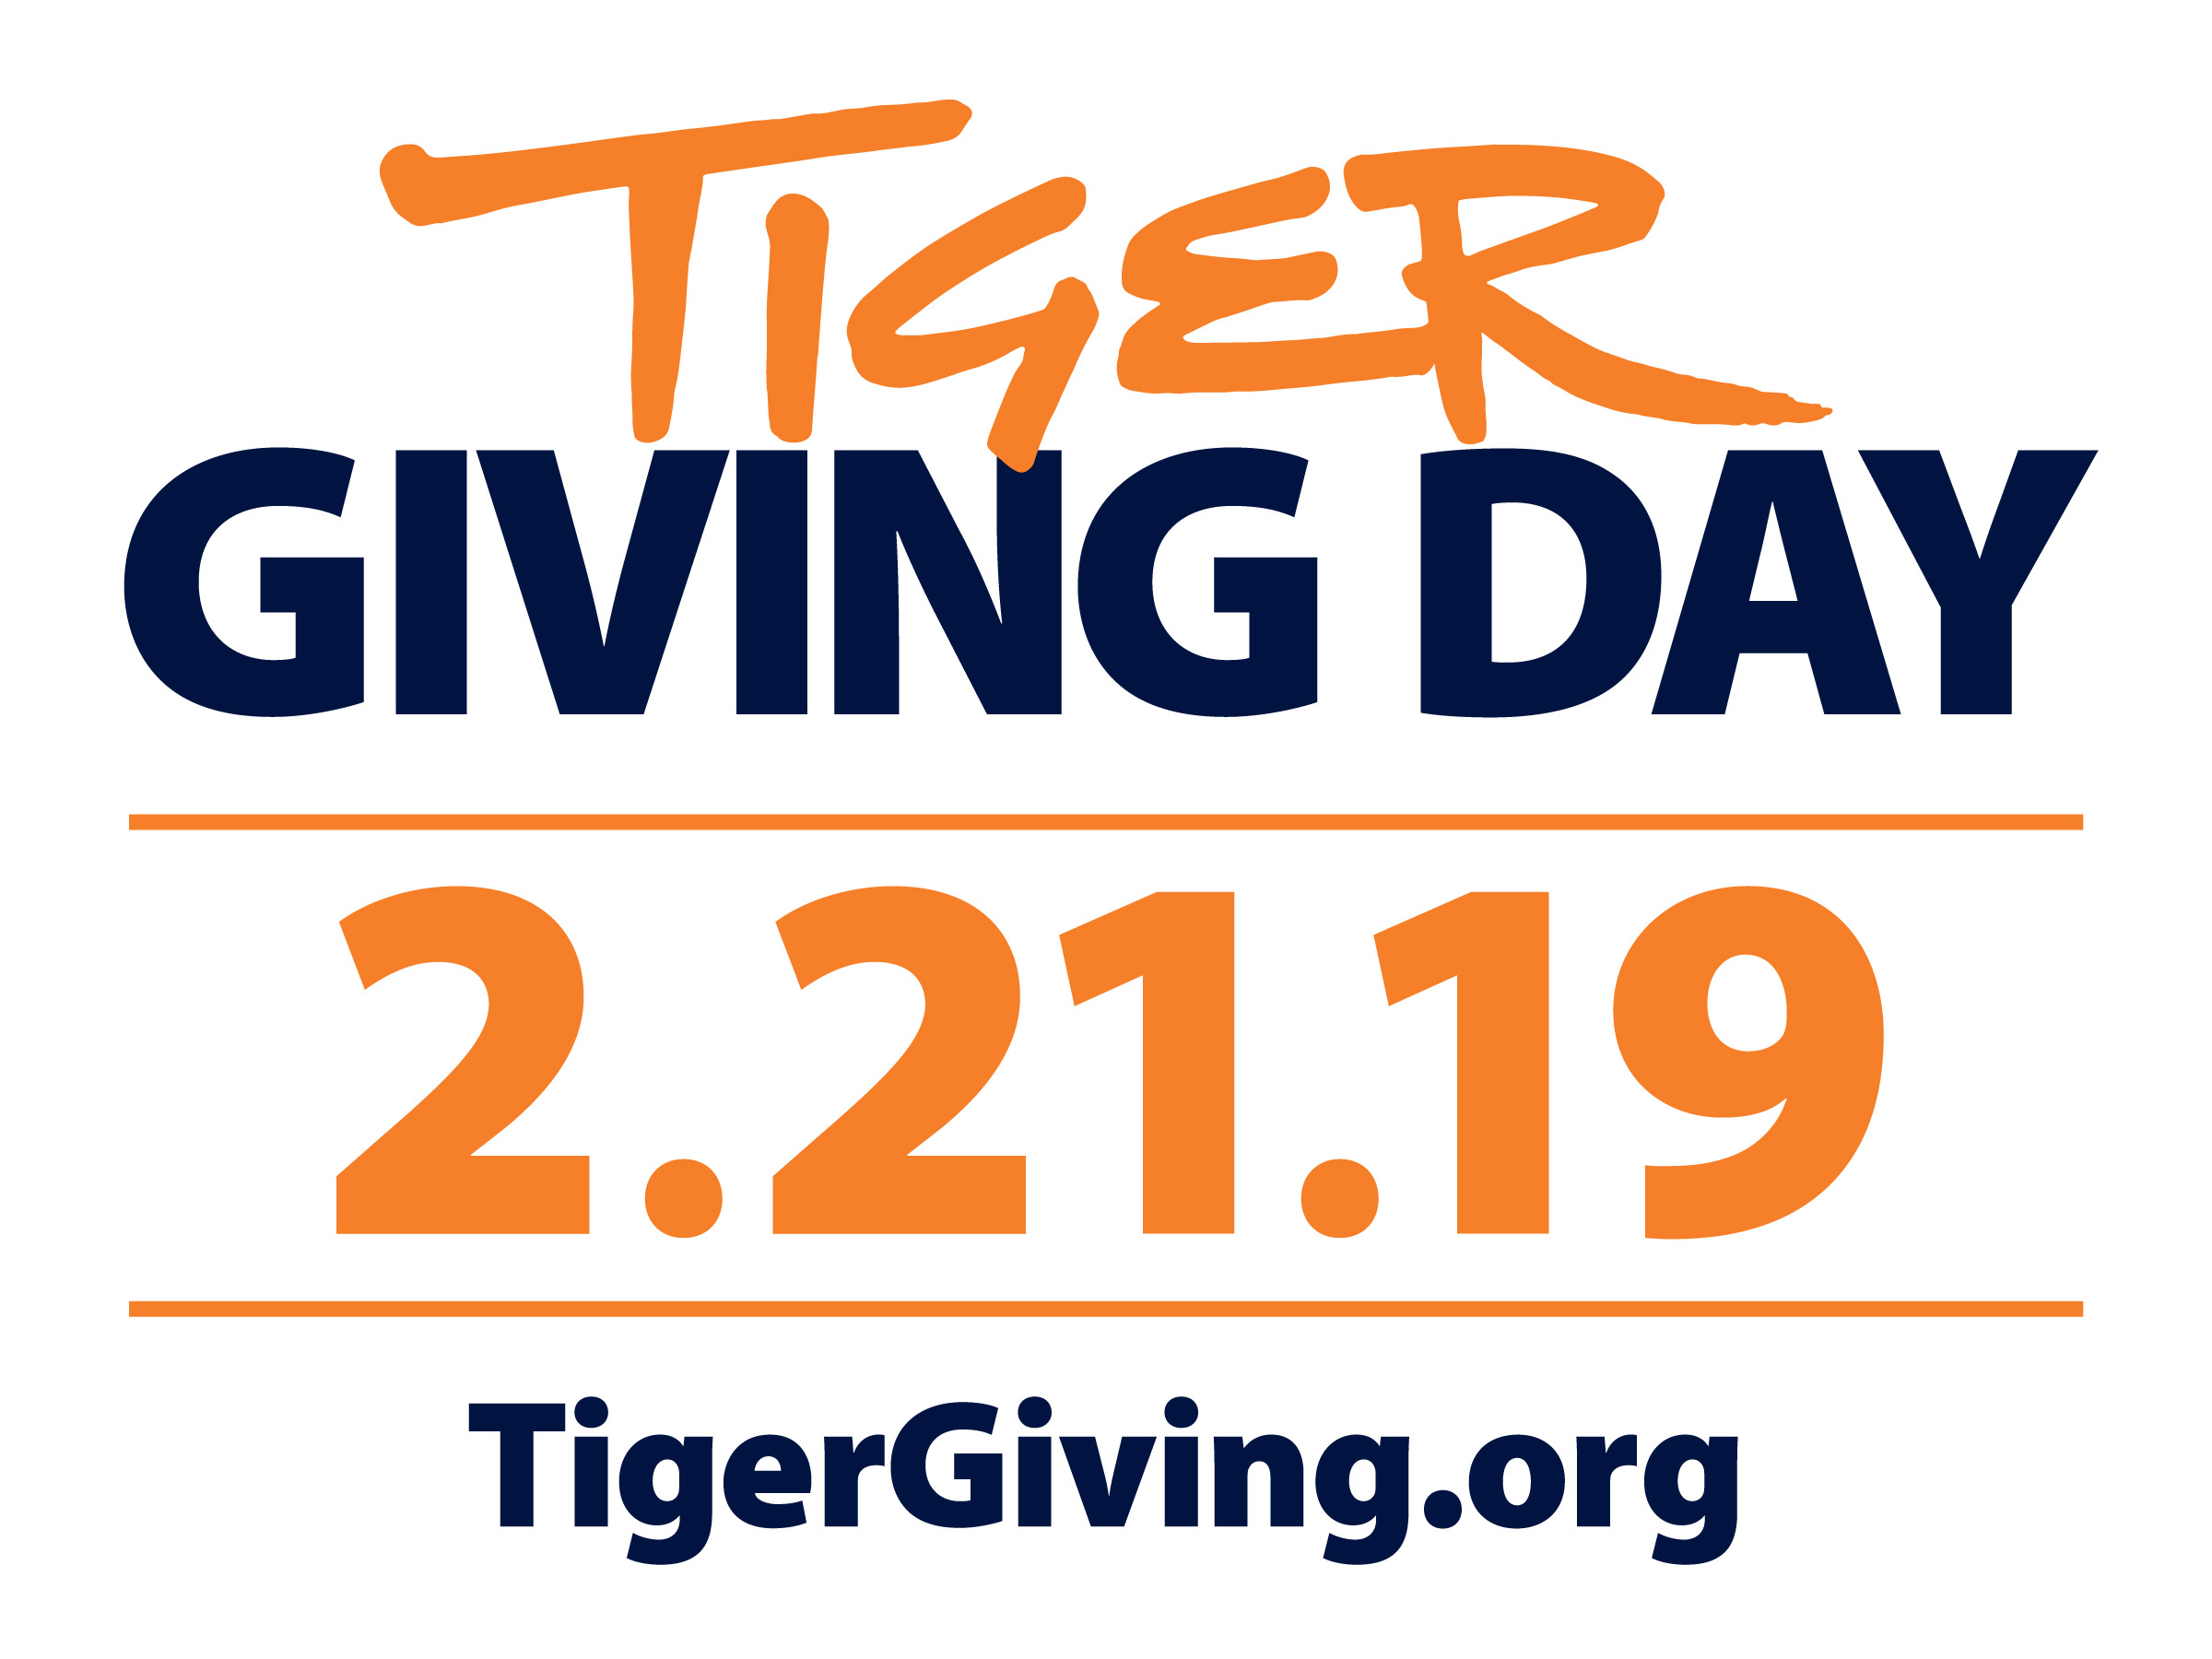 Support COSAM through Tiger Giving Day